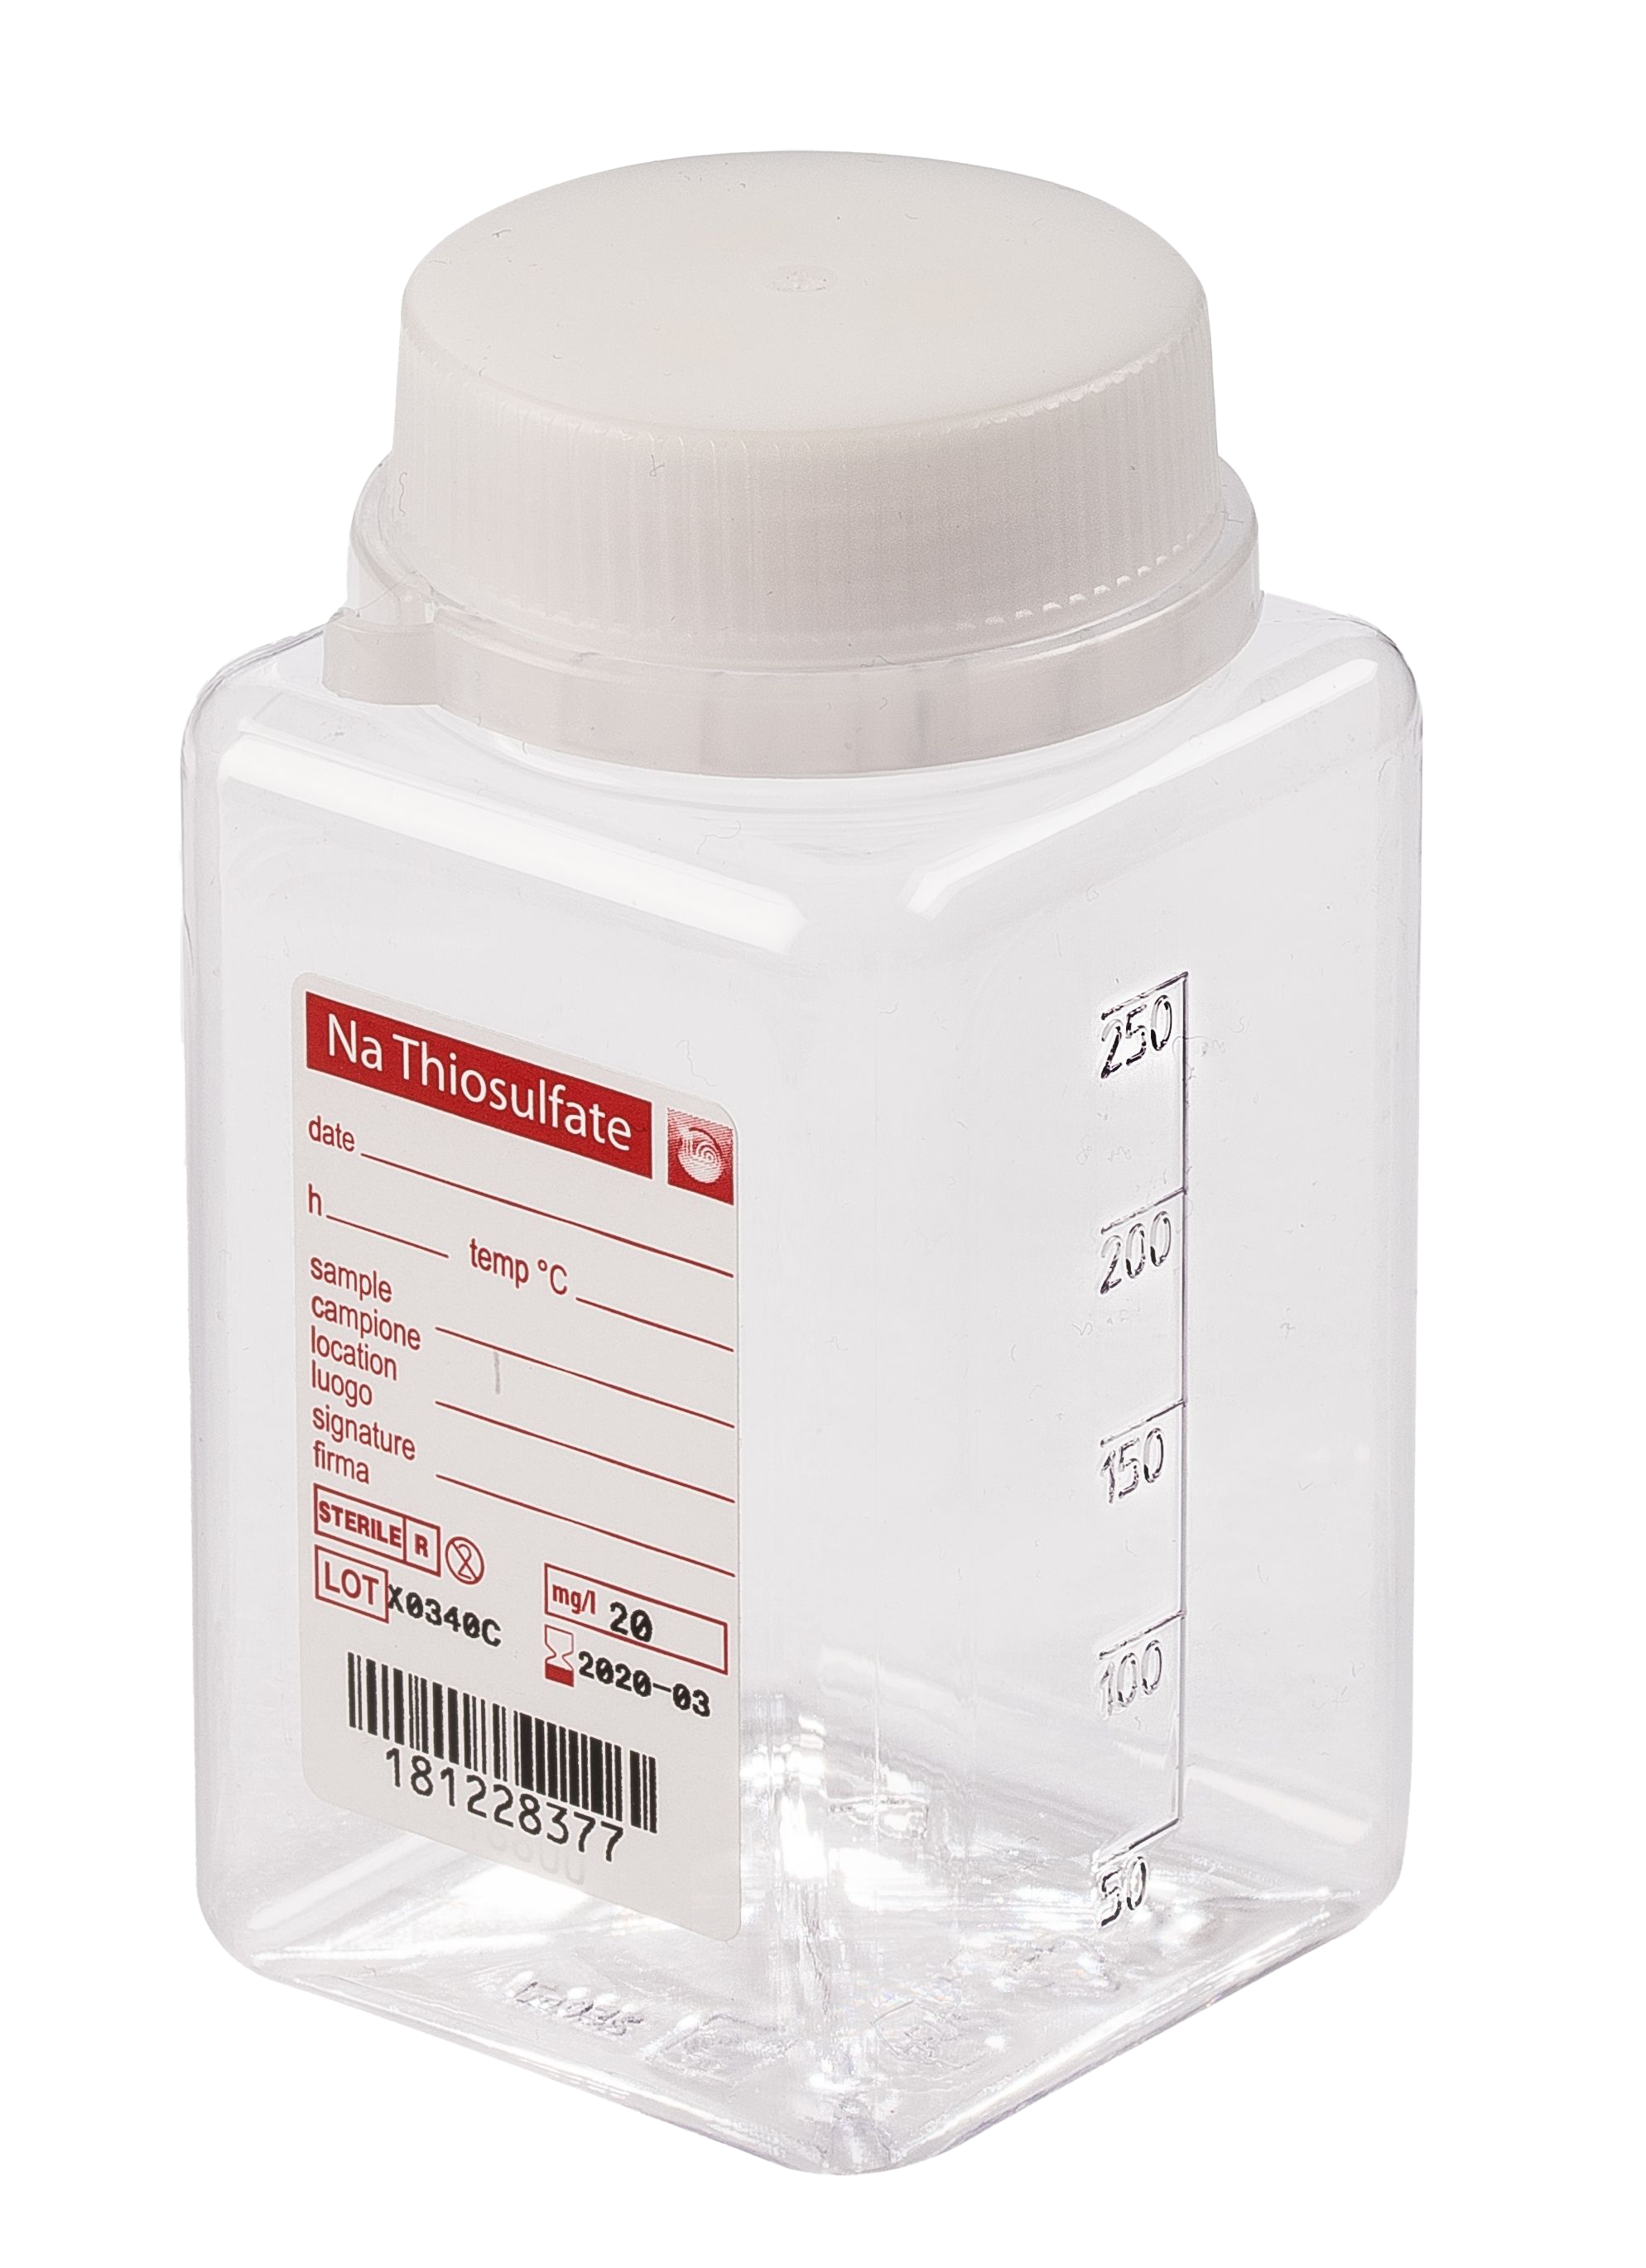 sterile Weithalsflasche mit 5 mg Natriumthiosulfat, 250 ml, PET, VE 216 St.